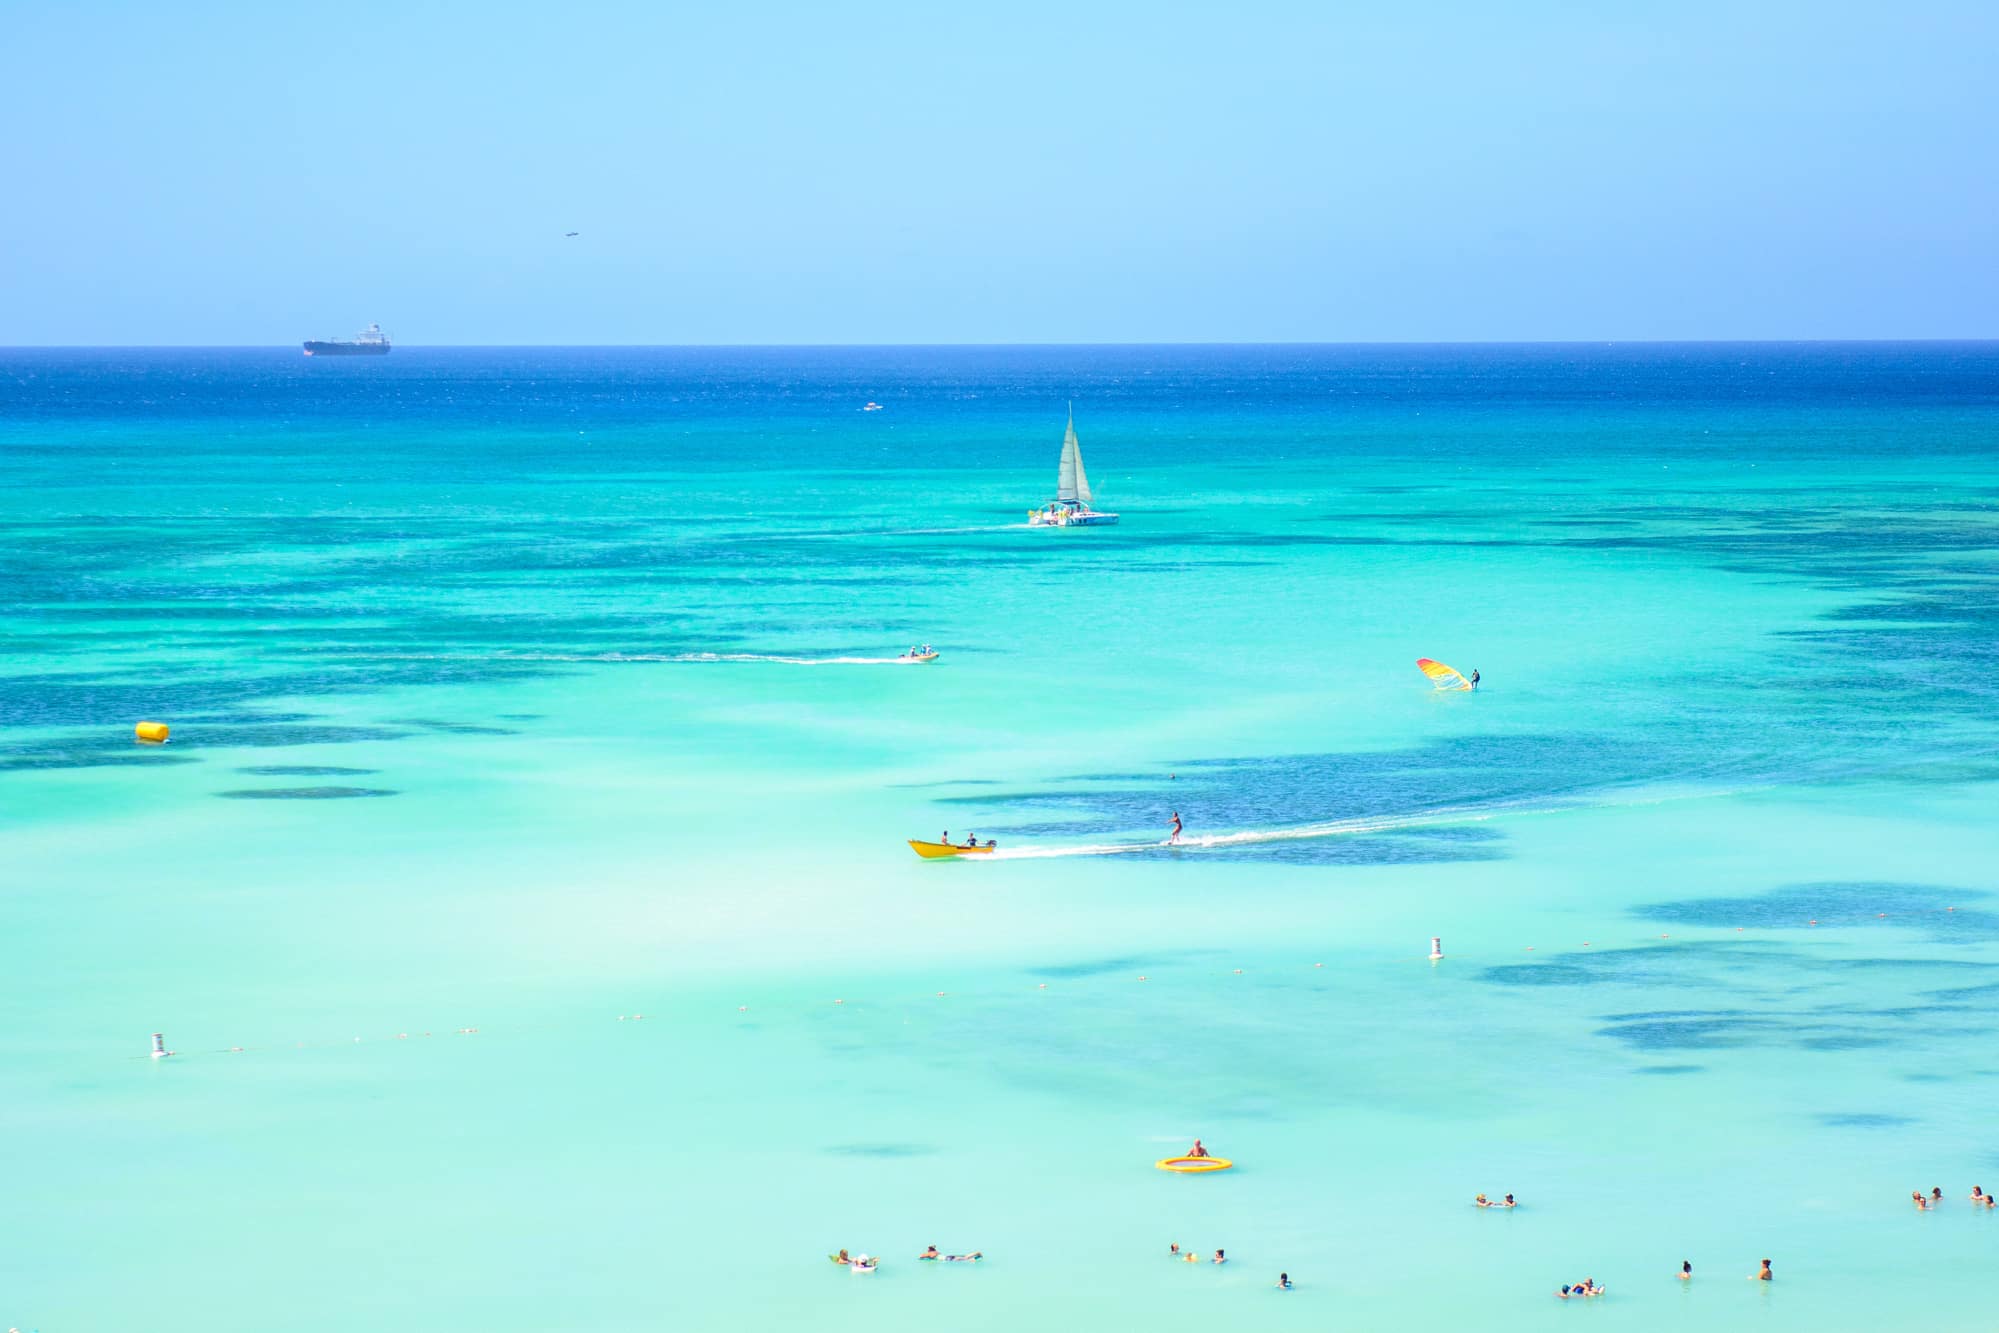 21 Photos That Will Make You Want To Visit Aruba - The Road Les Traveled